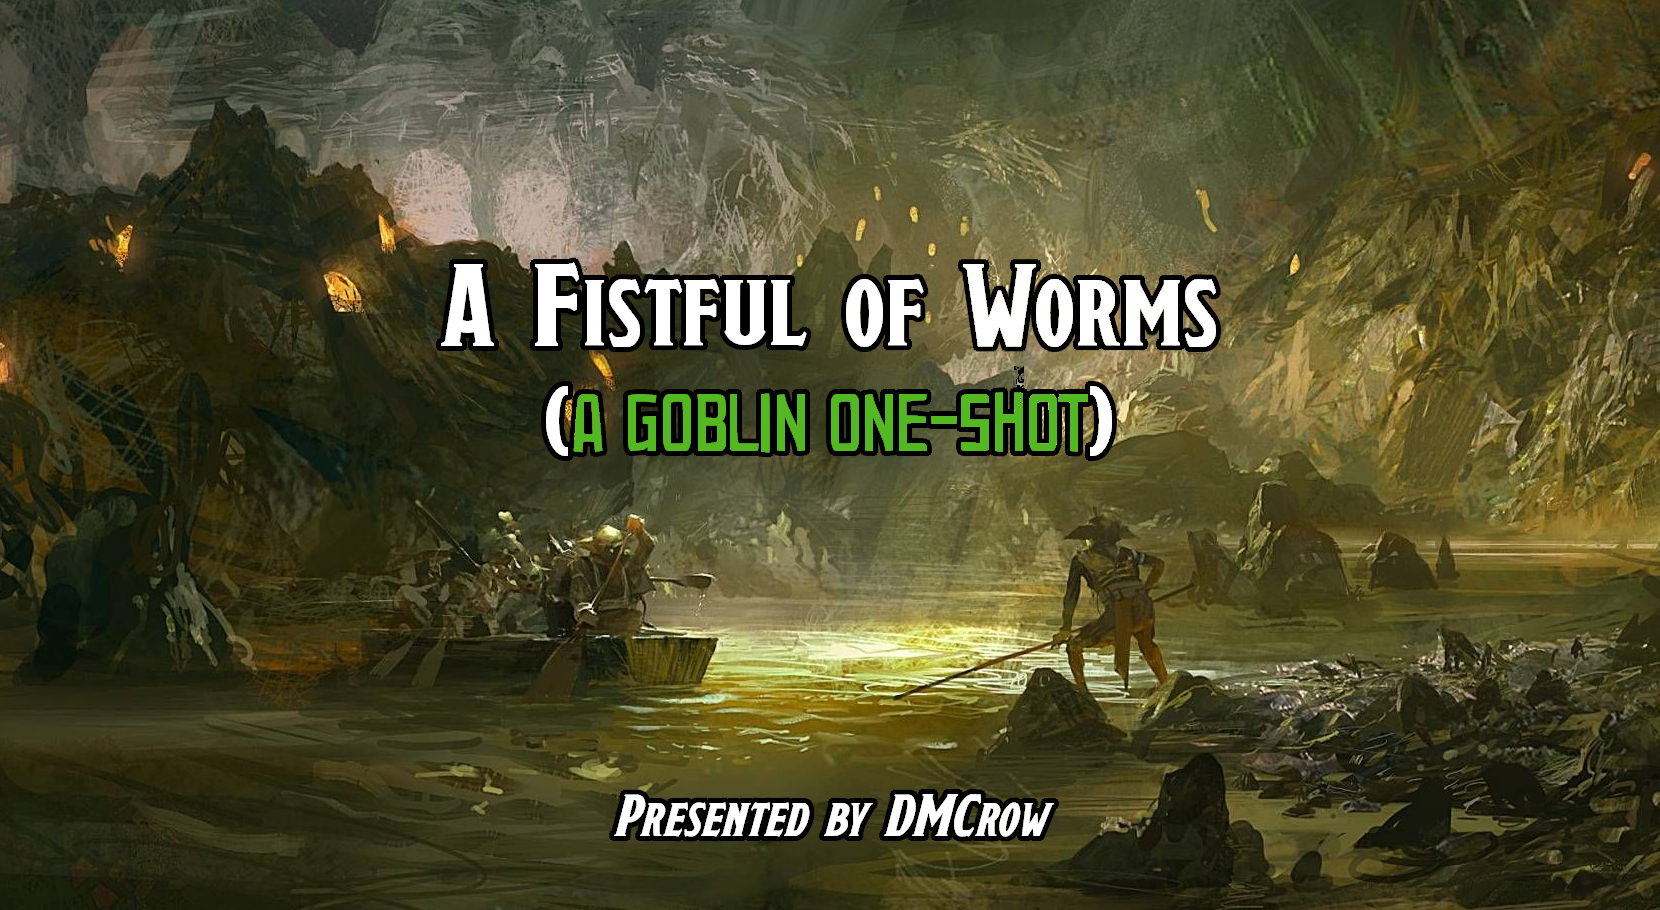 A Fistful of Worms